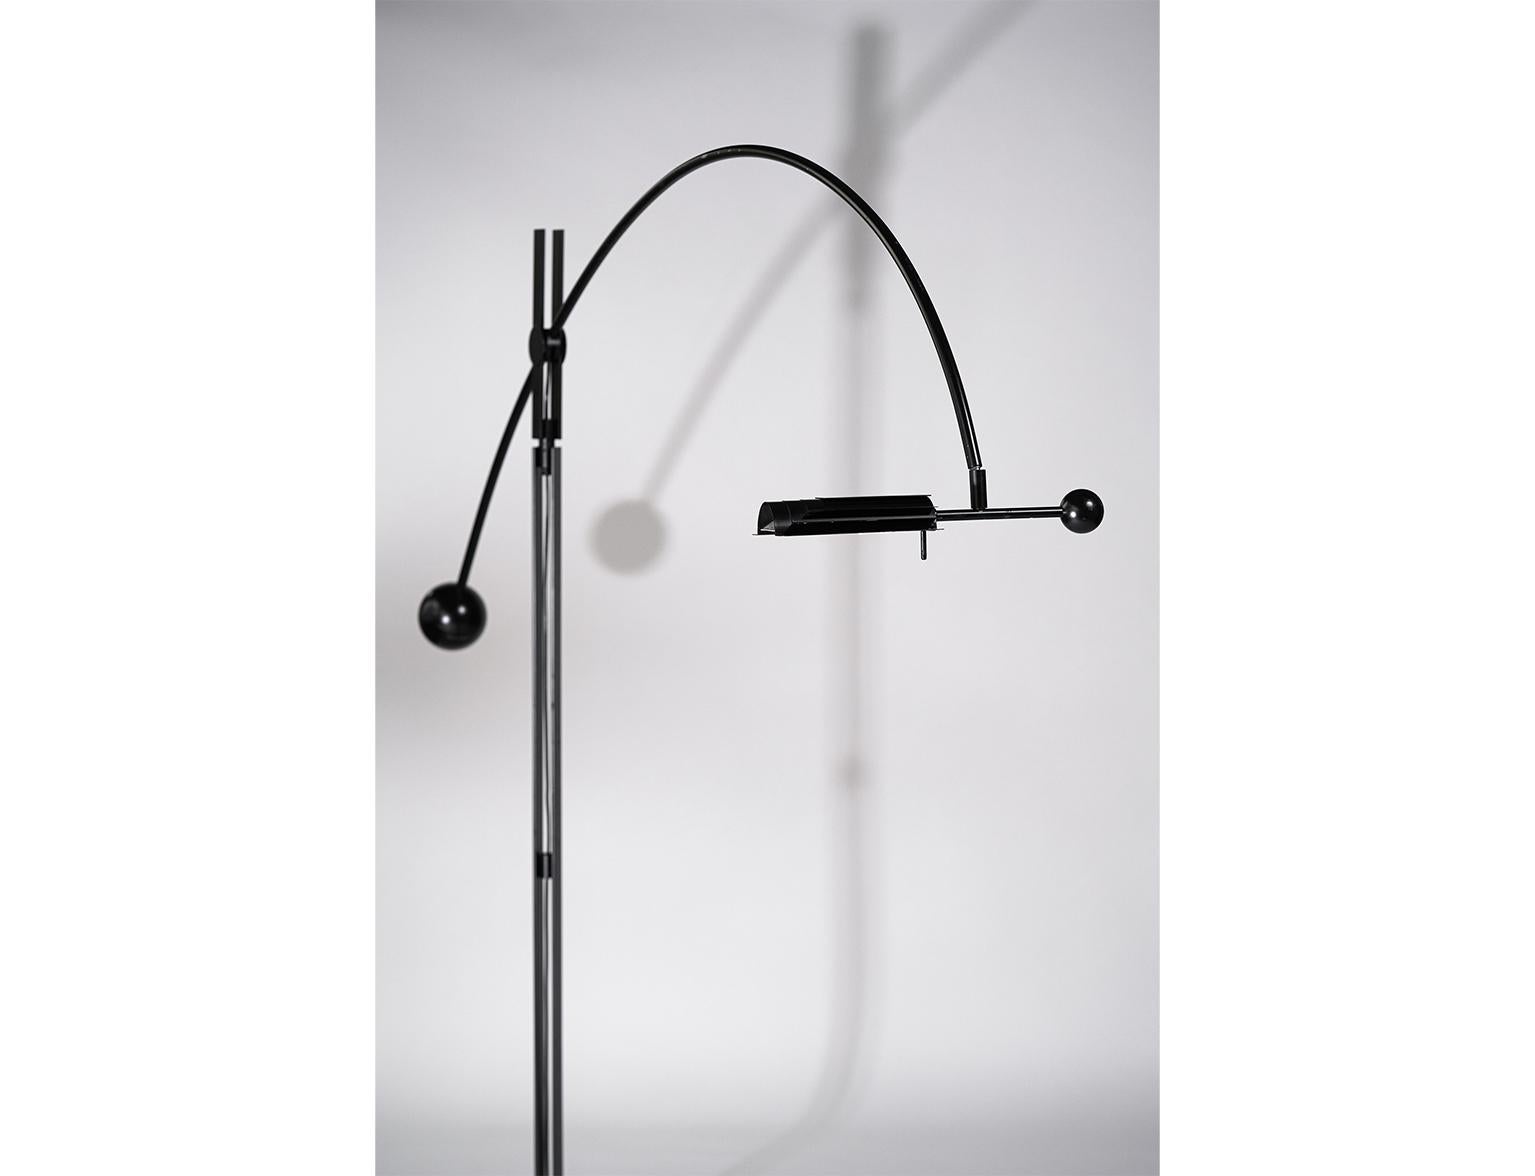 Swizz perfection. 

Engineered beauty - Model 823, a multi-adjustable floor lamp with a metal sphere counterweight. With strong identity and perfection, this Swizz International floor lamp takes on the room. 
Manufactured in Europe, possibly